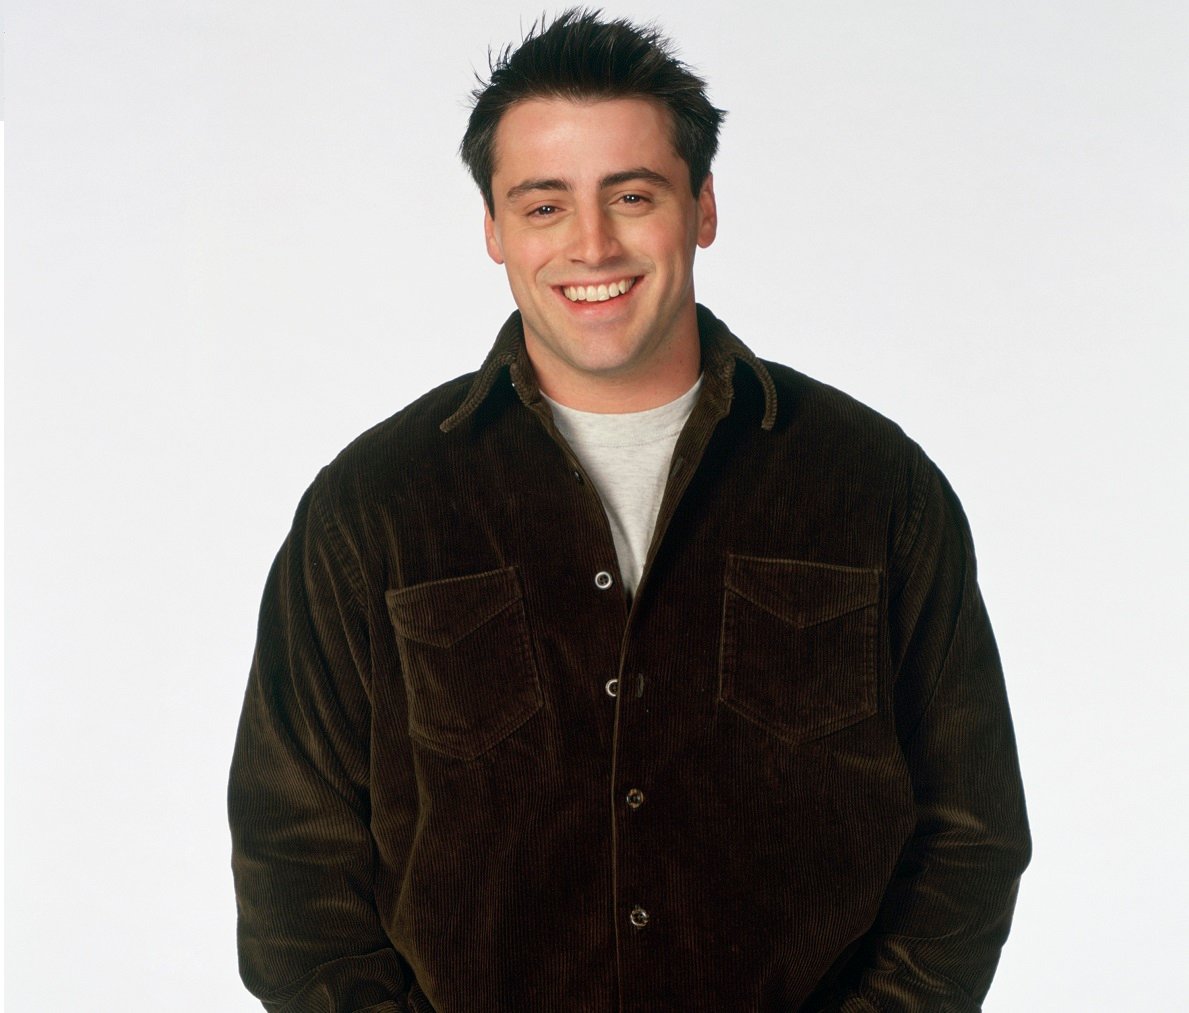 Matt LeBlanc as Joey Tribbiani poses for a promotional photo for 'Friends'